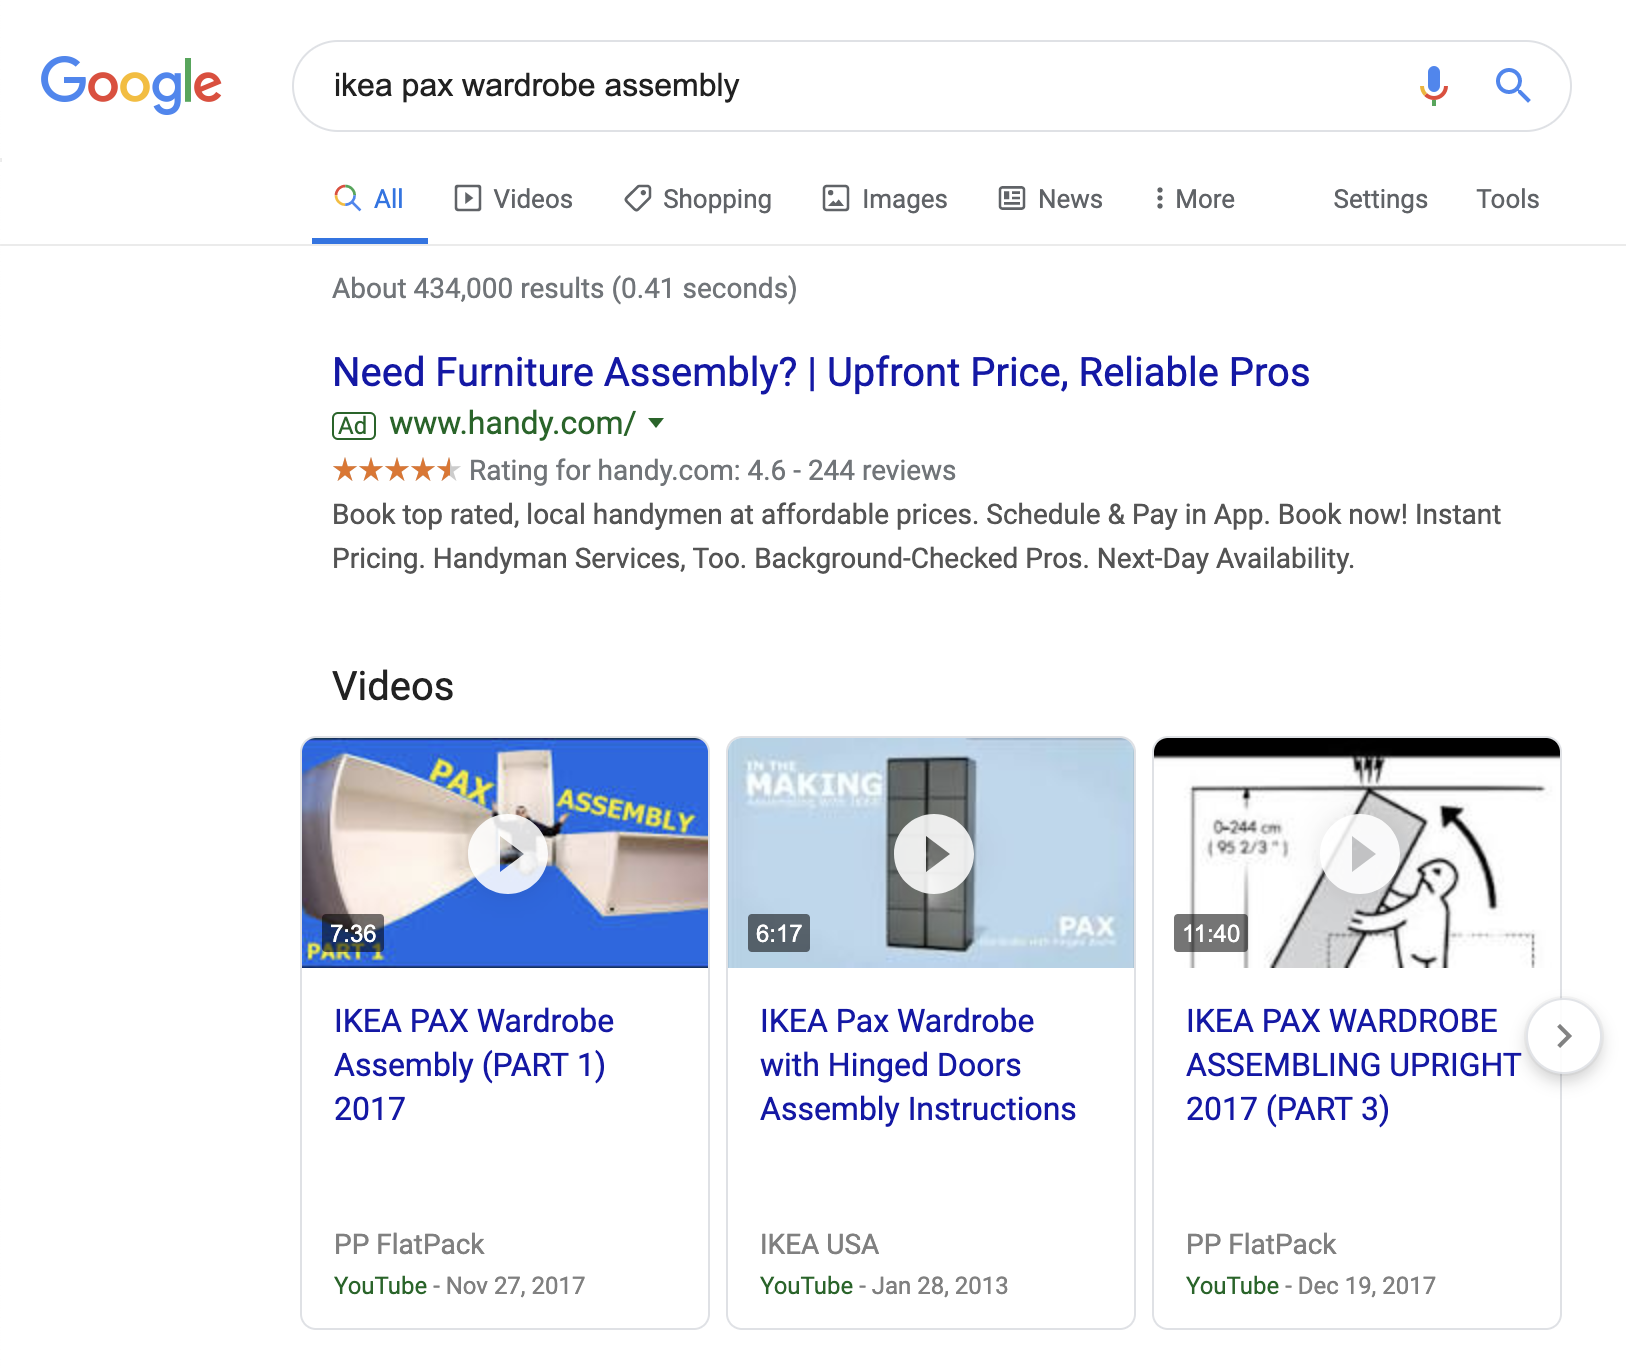 SERP for ikea pax wardrobe assembly query